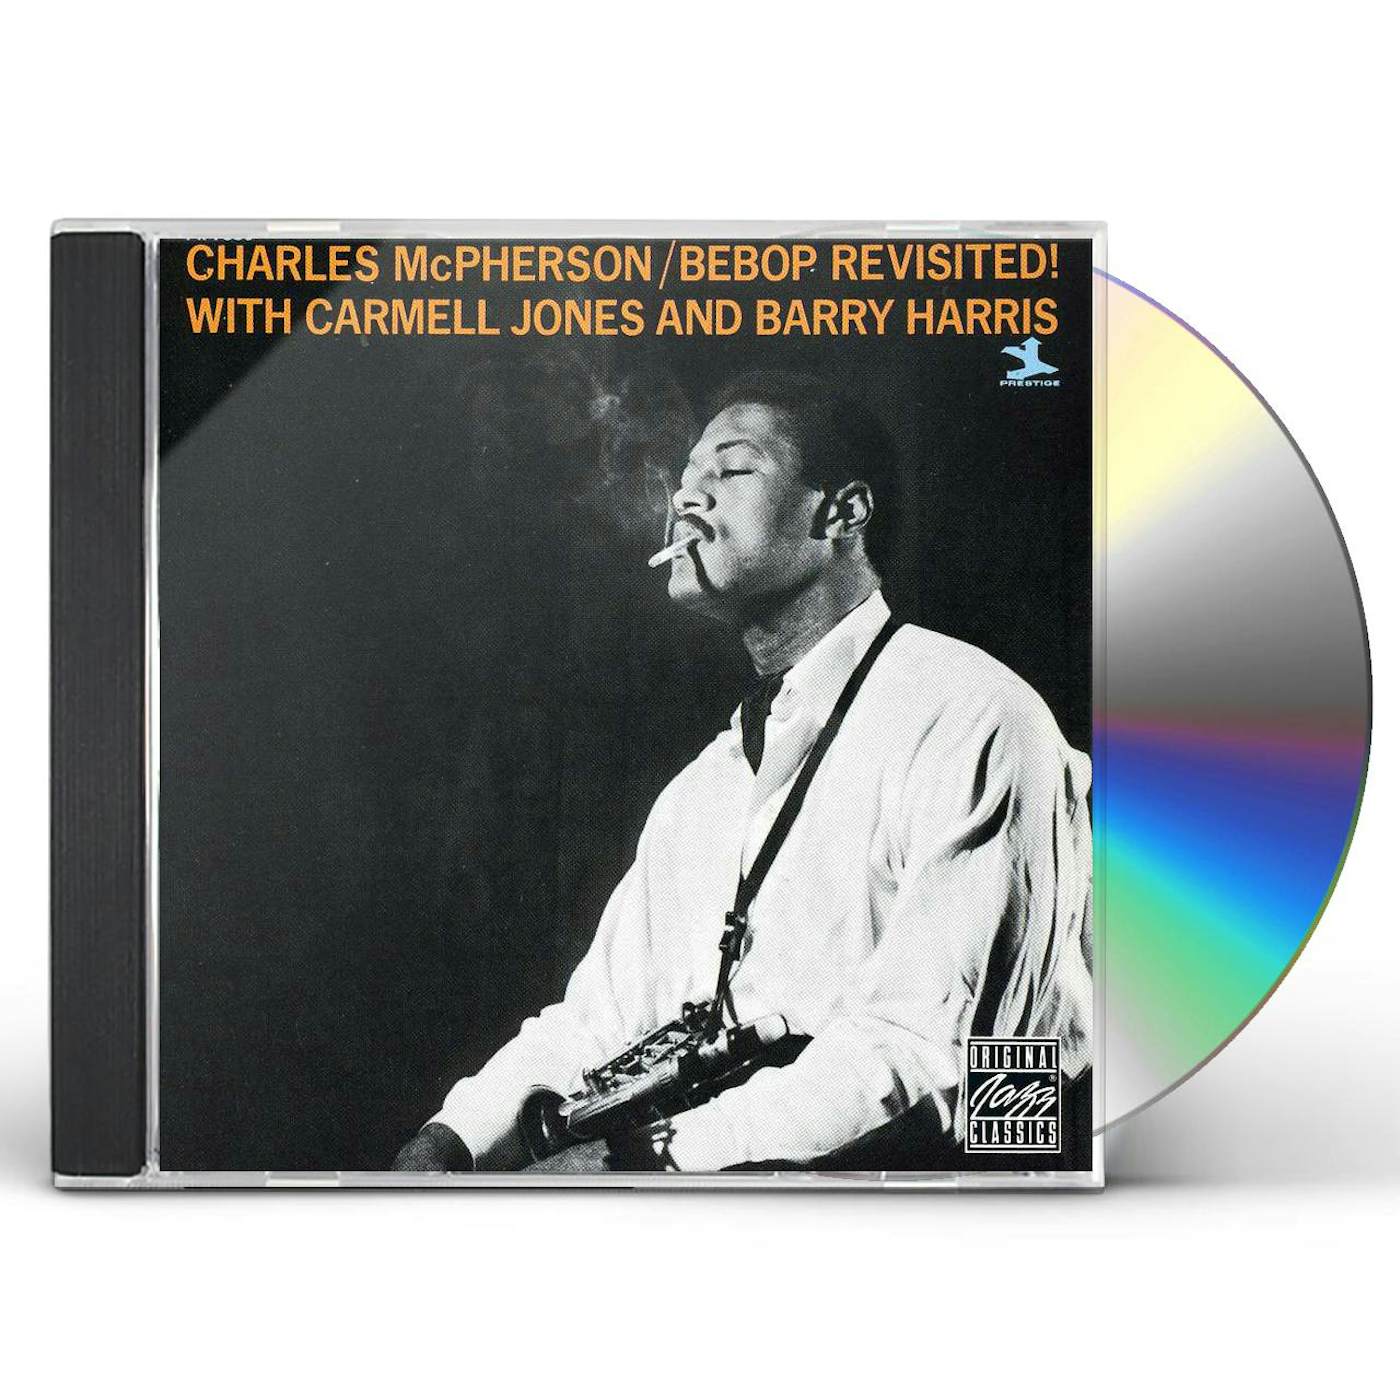 Charles McPherson BE BOP REVISITED CD